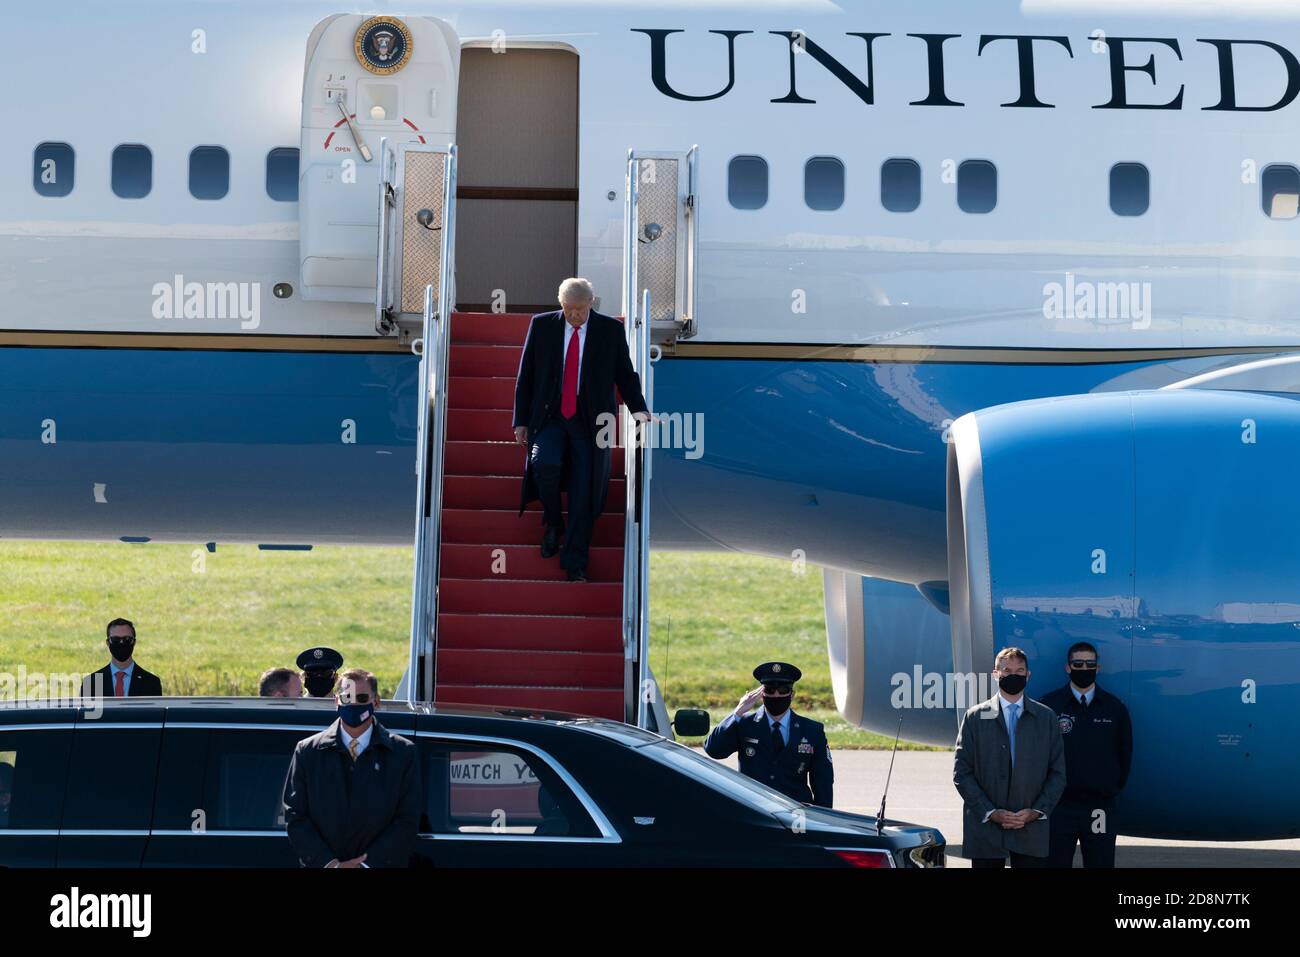 Ewing, New Jersey, USA. October 31, 2020: U.S. President Donald J. Trump is shown on Air Force one after landing at Trenton Mercer Airport in Ewing, N. J. Trump is campaigning in several towns in Pennsylvania including, Newtown, Butler and Reading, PA Credit: Brian Branch Price/ZUMA Wire/Alamy Live News Stock Photo